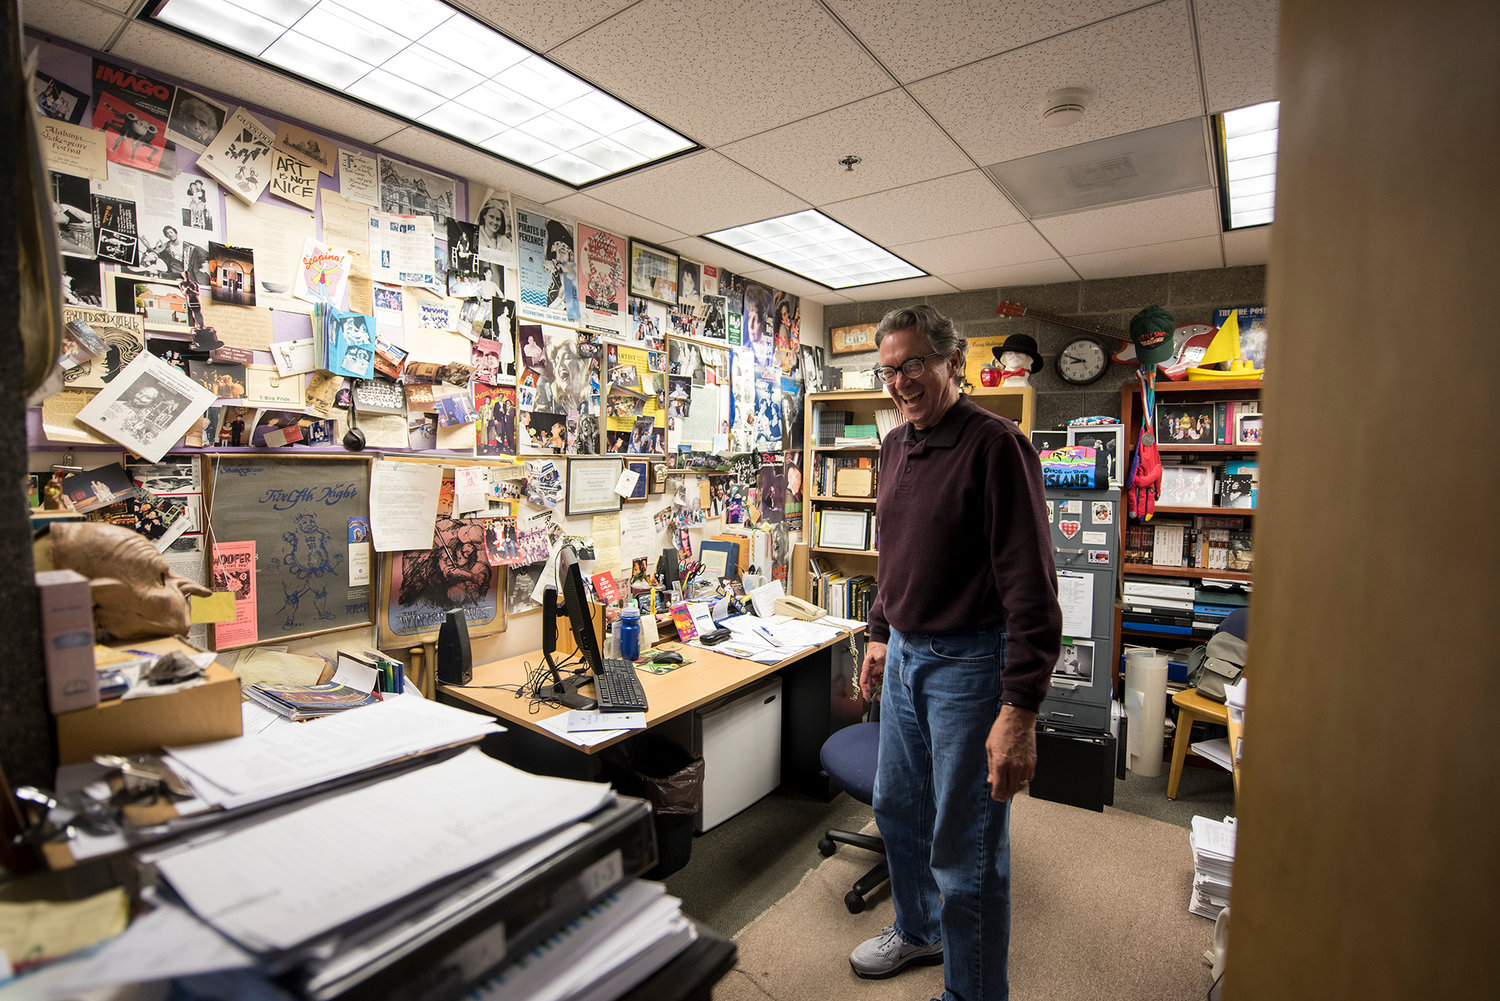 Tyrrell's office is lined with over 300 pictures from various plays, performers and moments outlining his 25 years as the head of the drama department at Centralia College. "Every picture is a reflection of my life," he said. "It's a tribute to a life of telling stories."